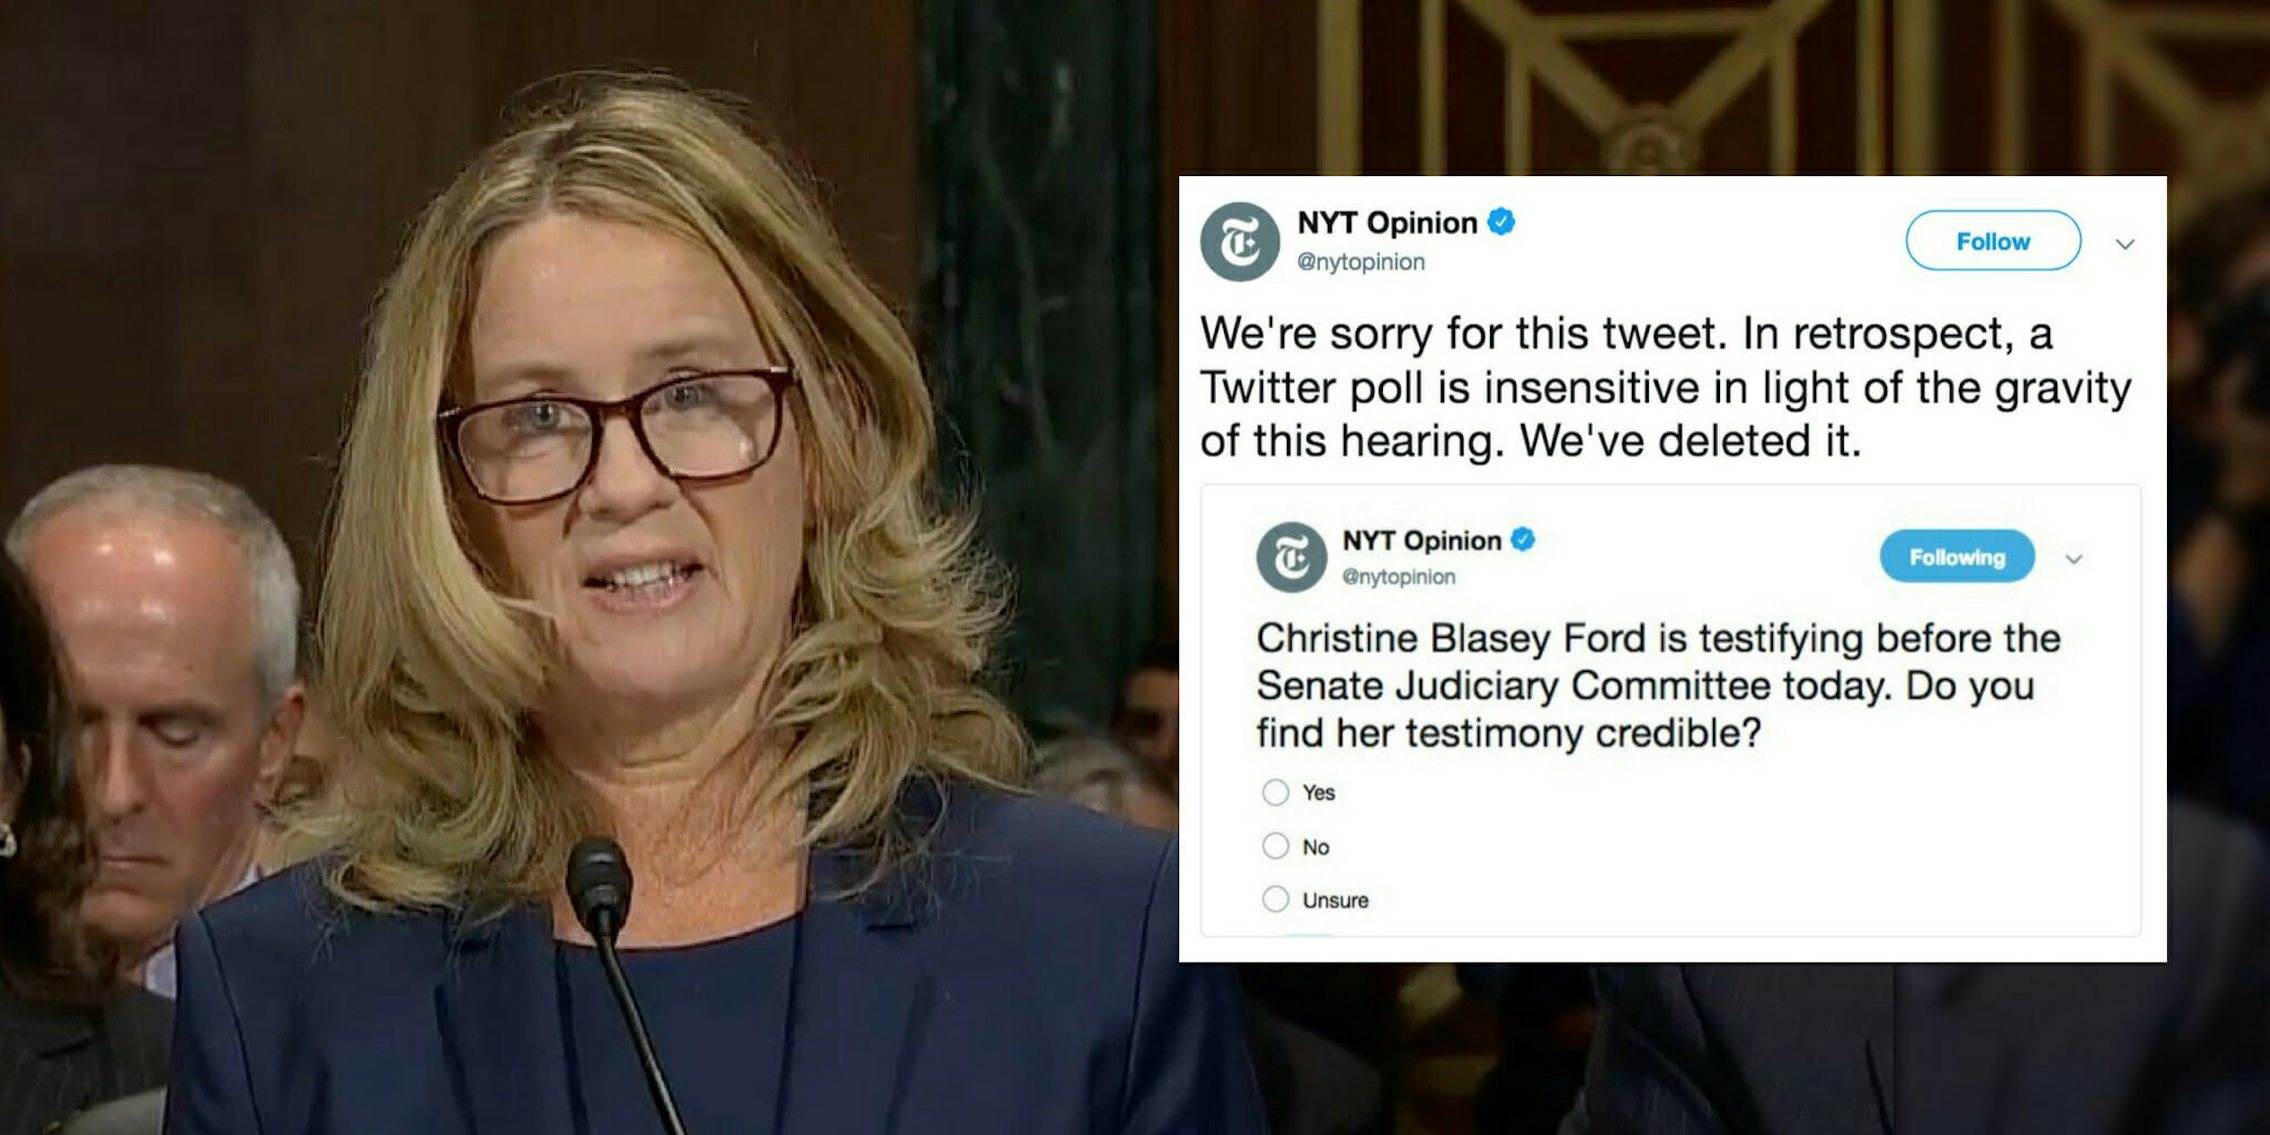 New York Times tweeted a poll about Christine Blasey Ford's believability